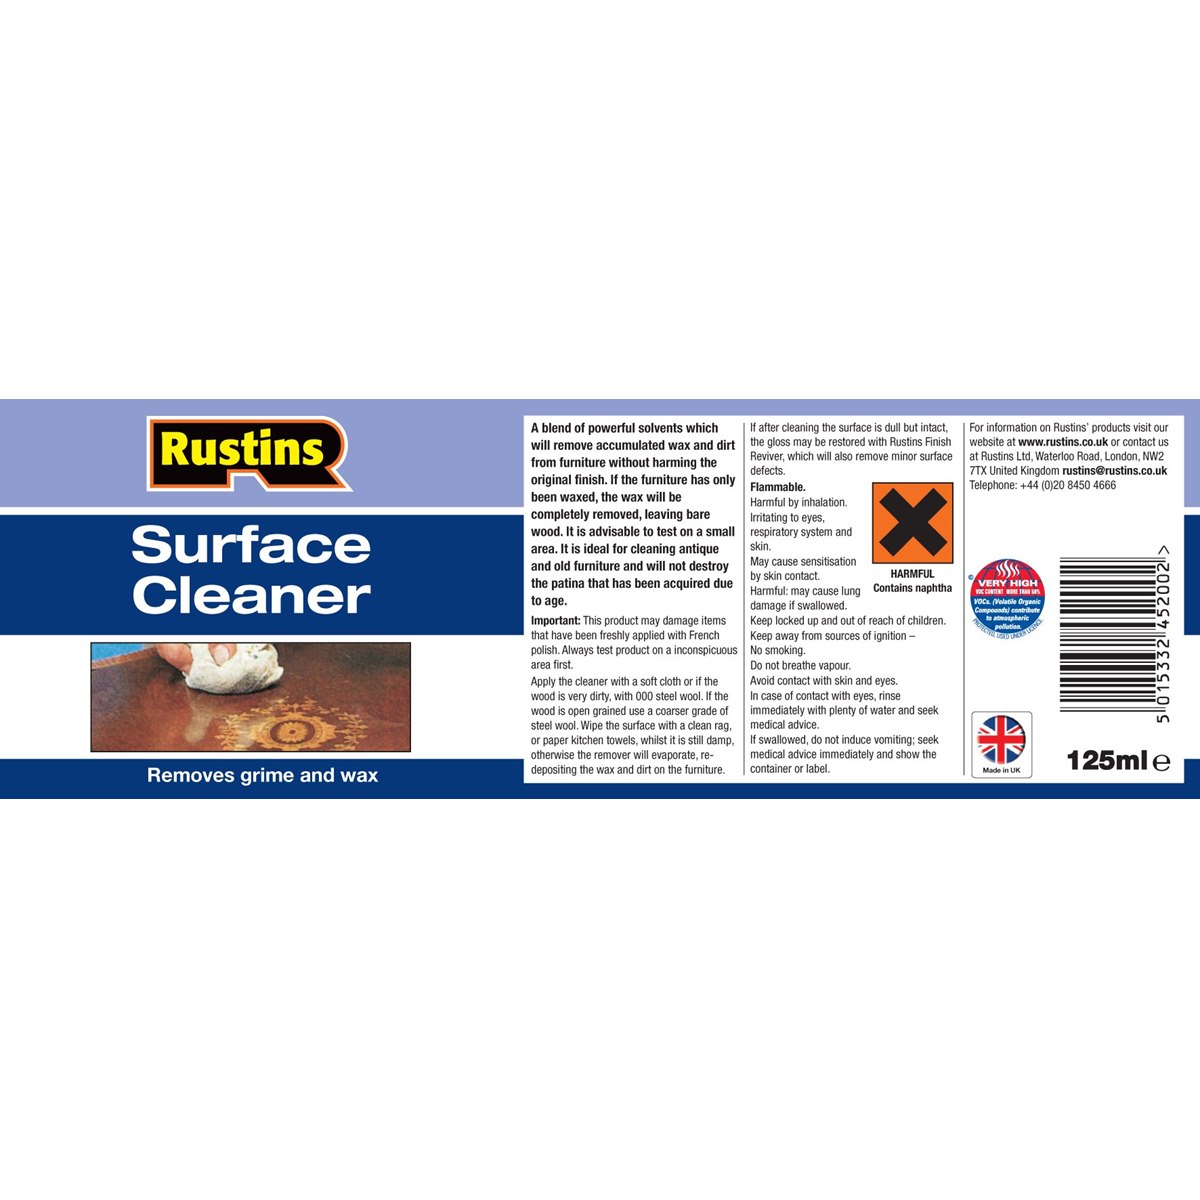 Rustins Surface Cleaner usage instructions